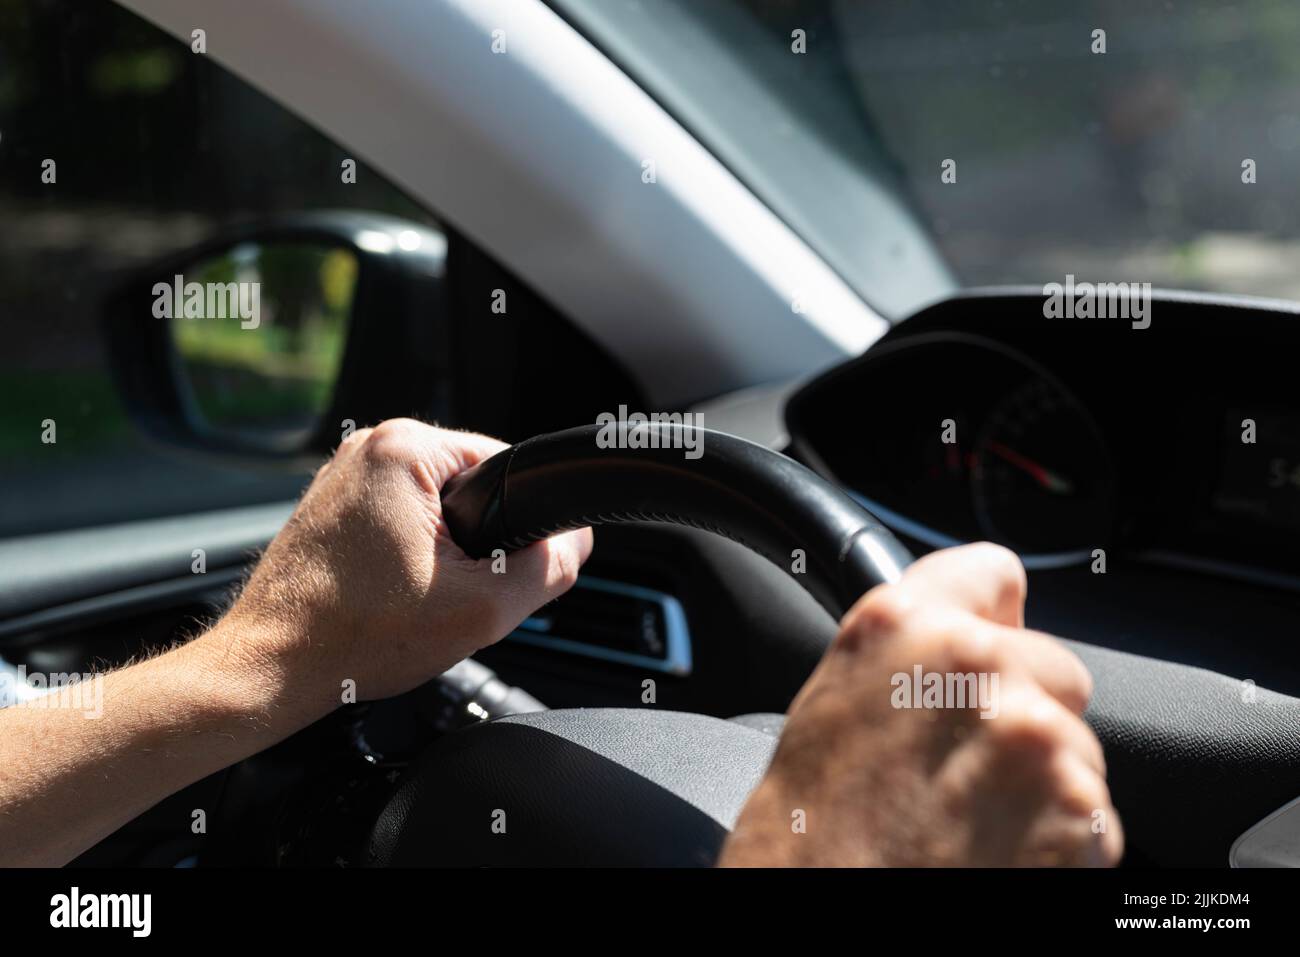 White men hands control a car steering wheel while driving on the road. There are no recognizable persons or trademarks in the shot. Stock Photo